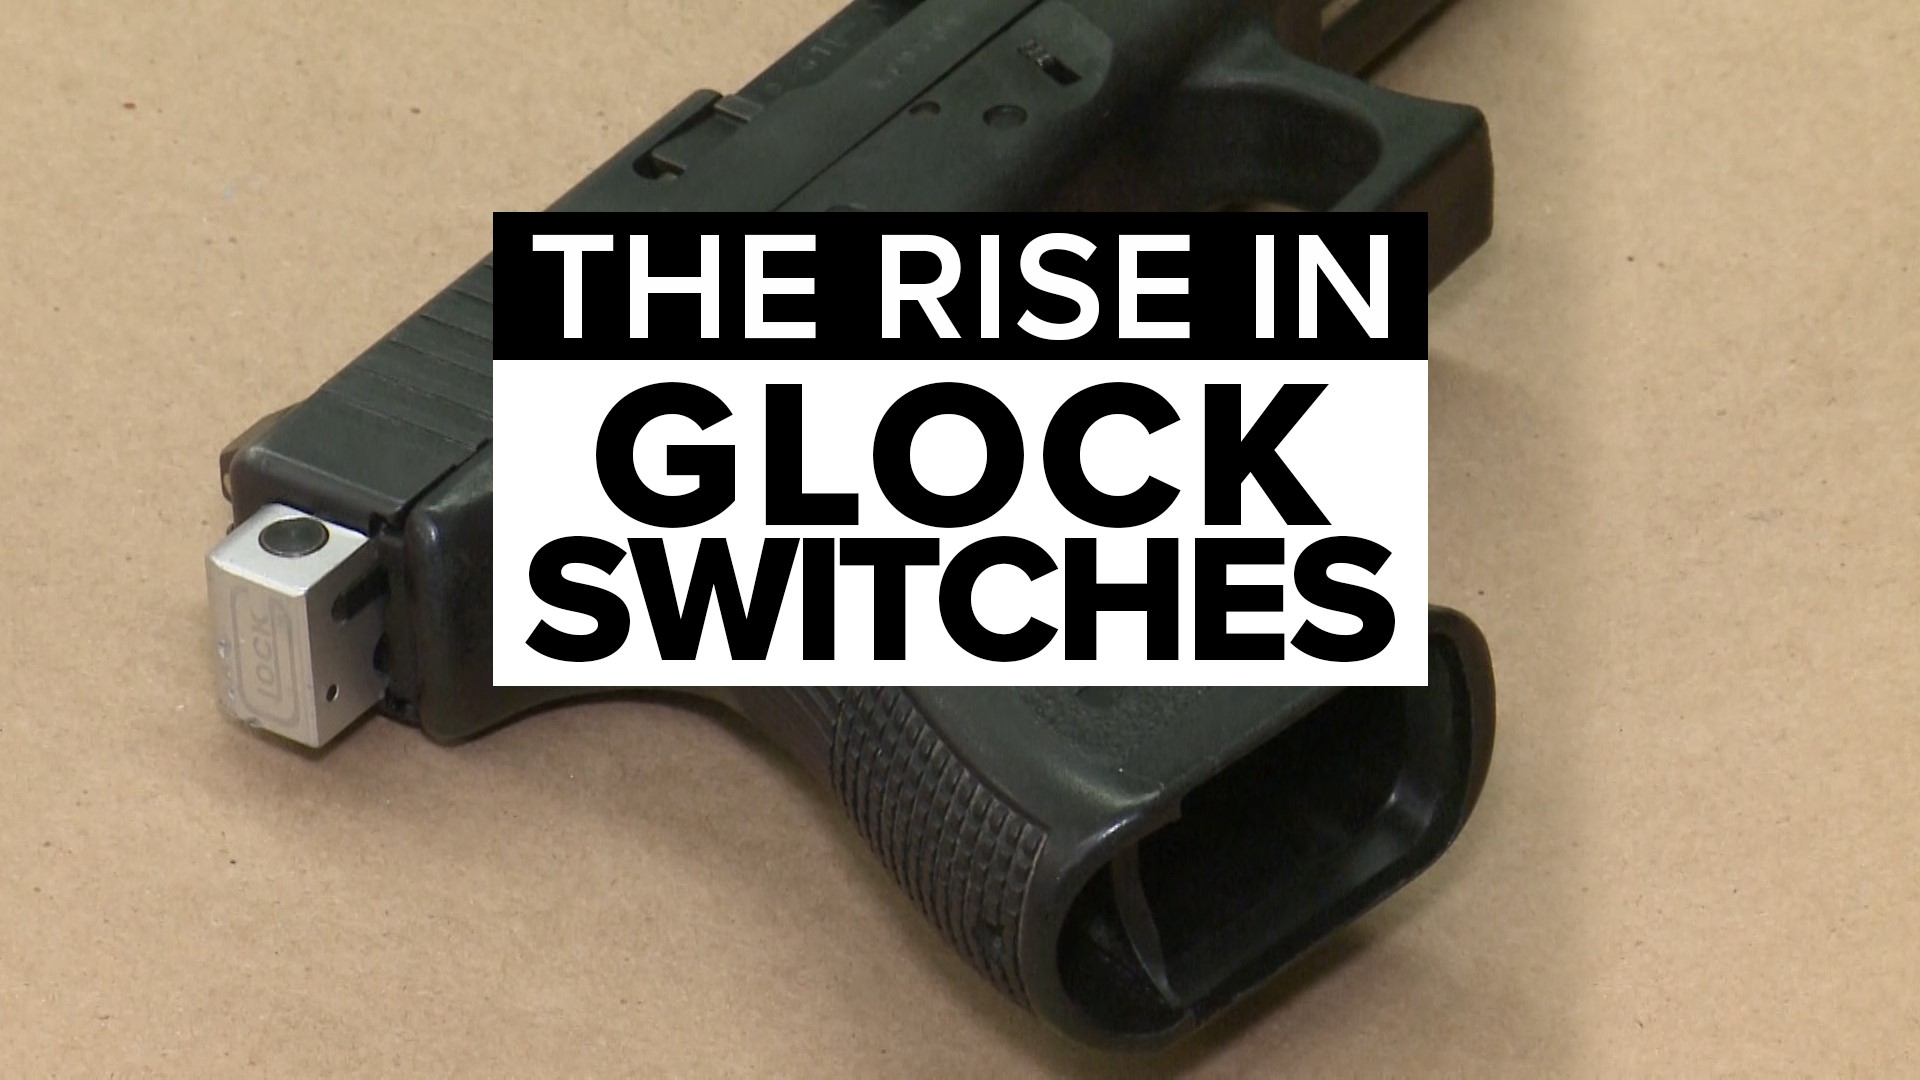 It’s the new shot heard around the world and it comes from a Glock.